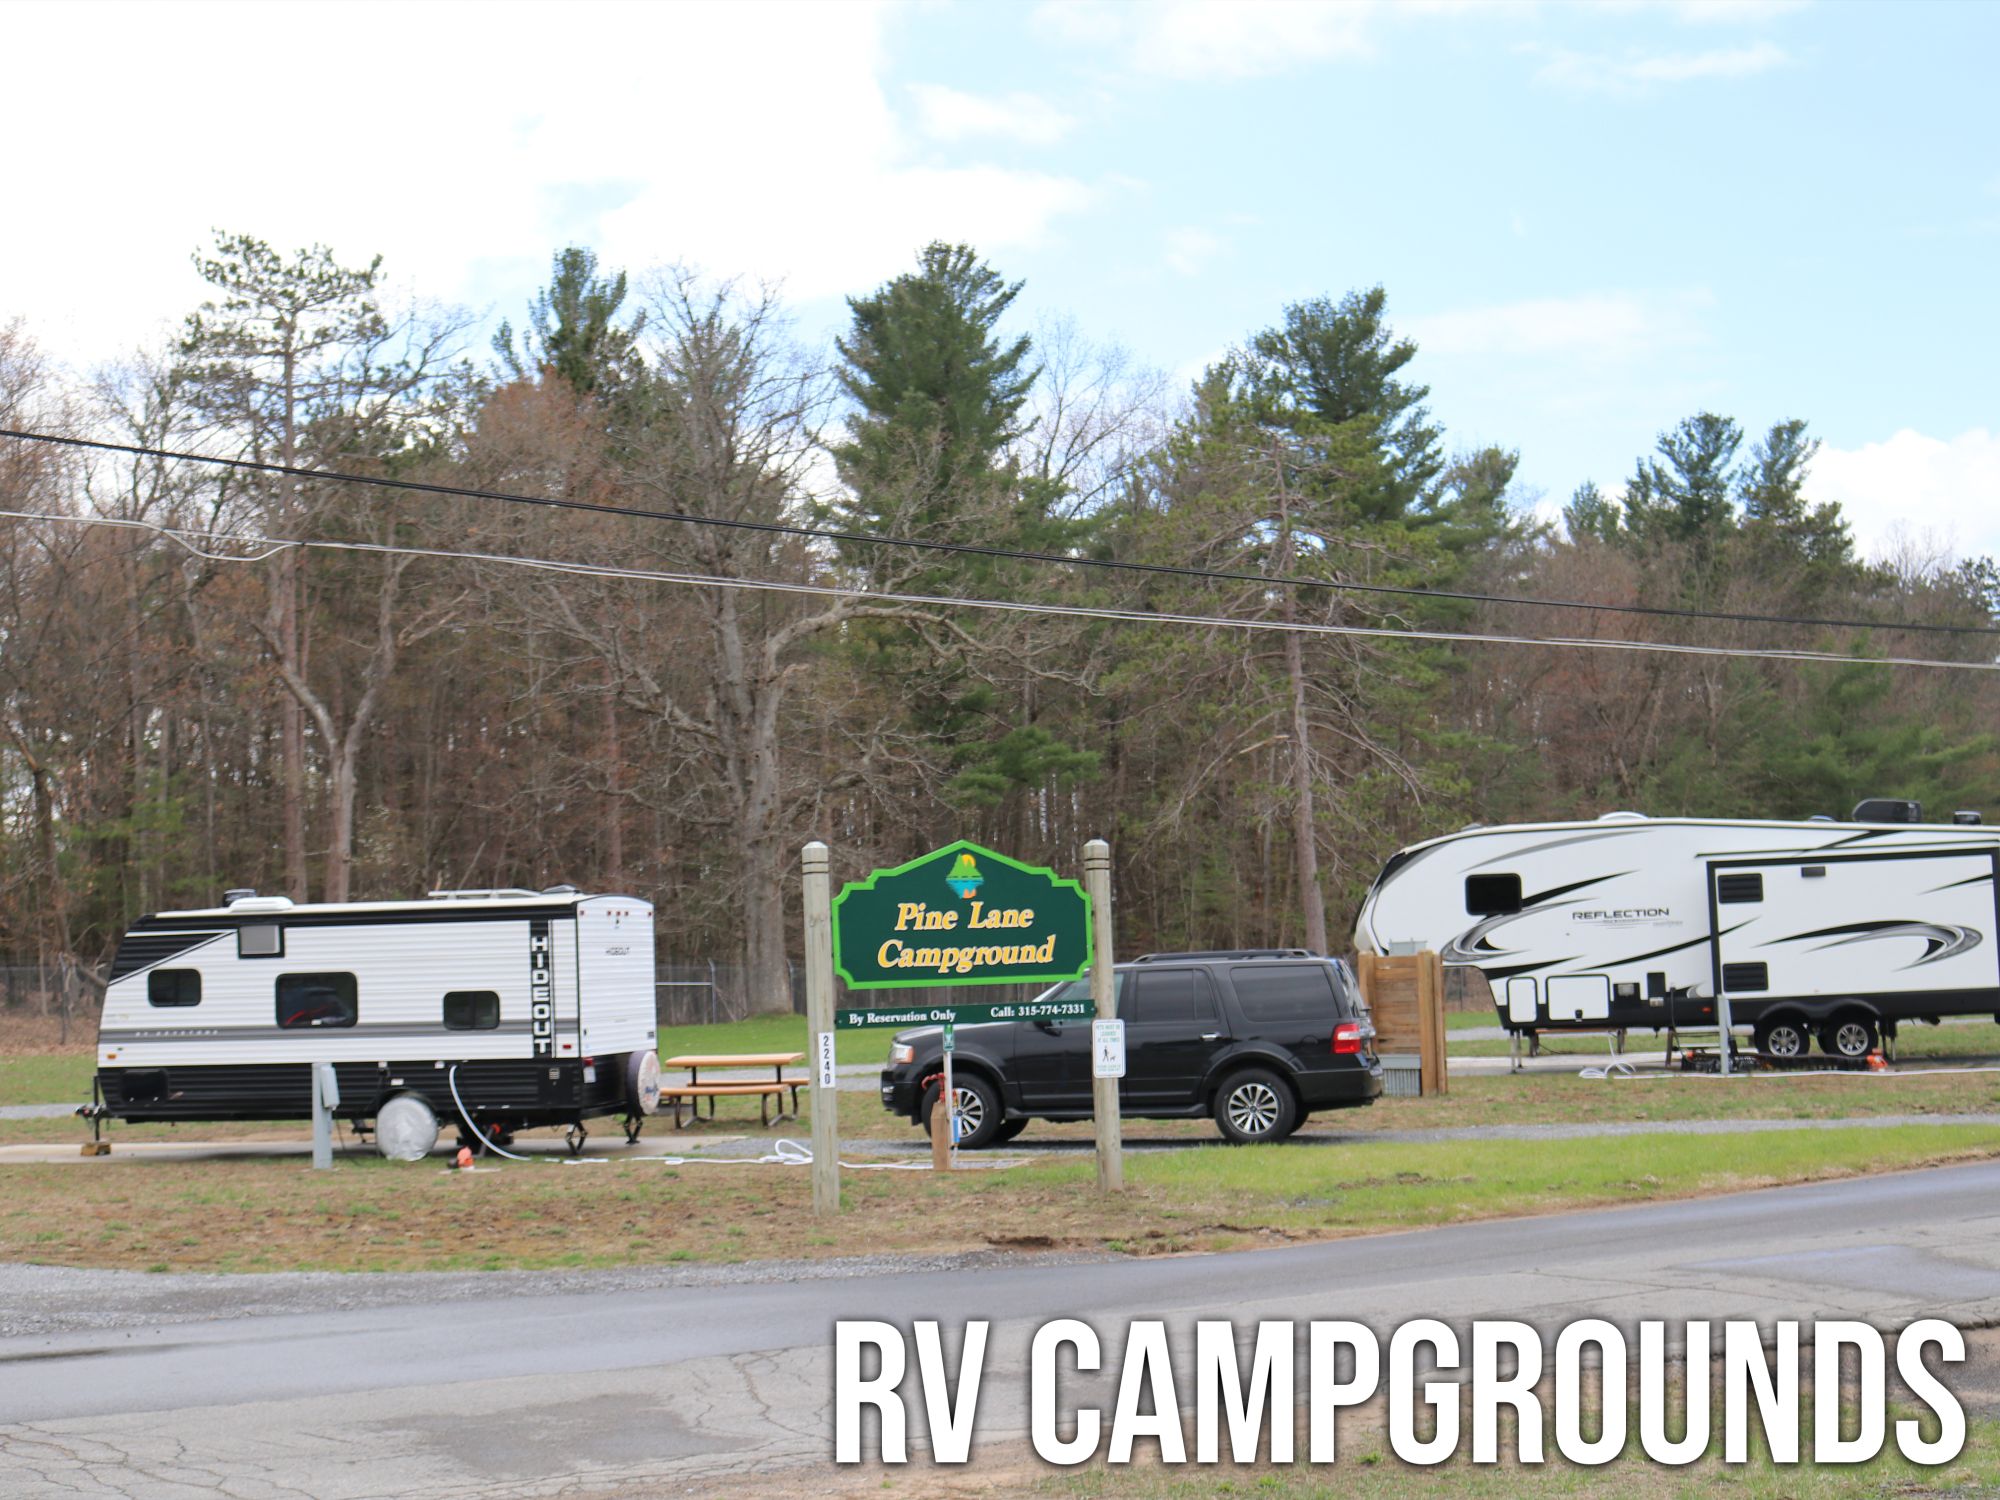 RV_Campgrounds.jpg